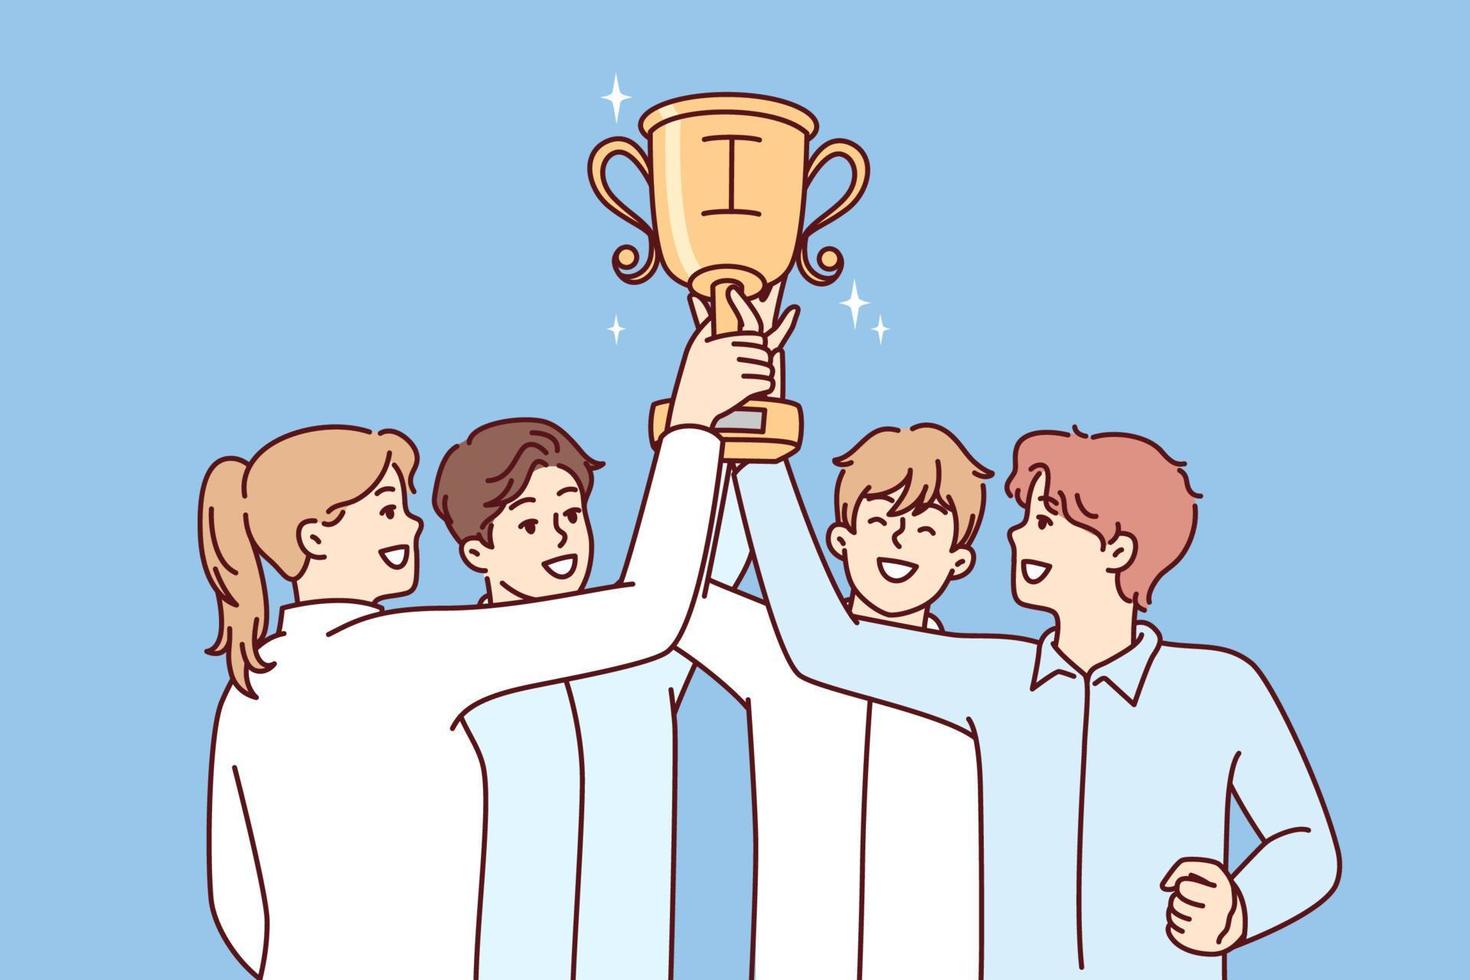 Tight-knit team of office workers raises golden cup over heads rejoicing at best sales results. Men and women hold first place prize after winning best startup competition. Flat vector design